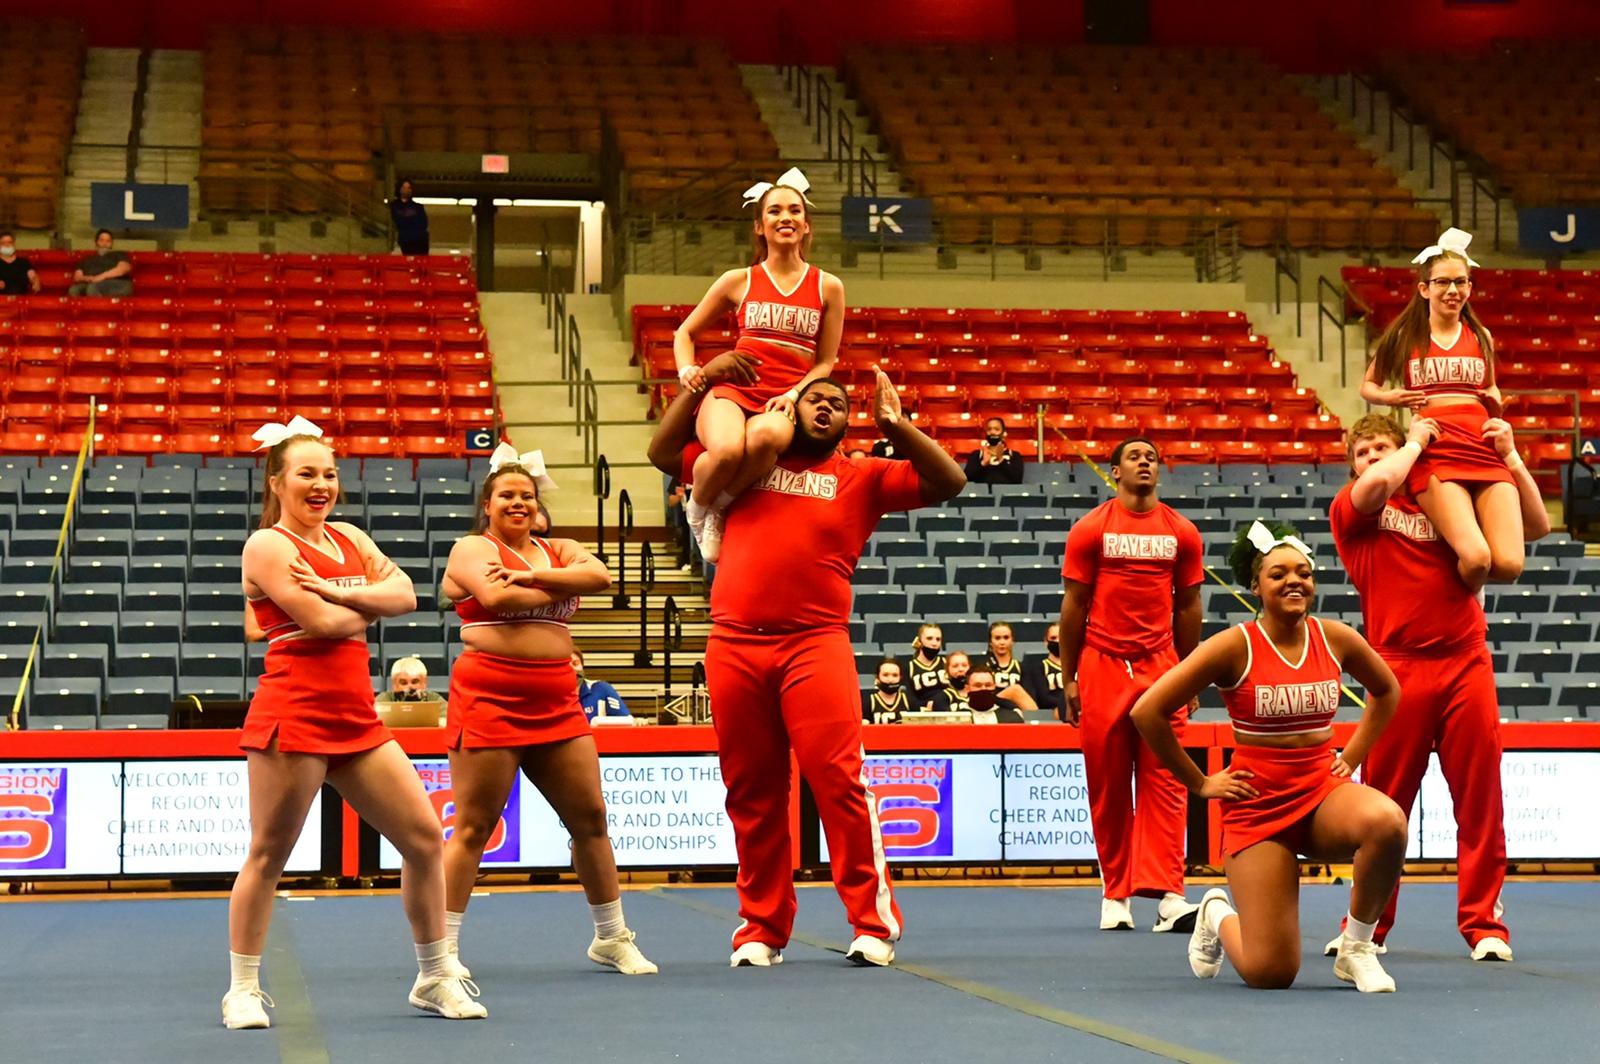 Red Raven Cheer Places 3rd in Region VI Cheer Competition